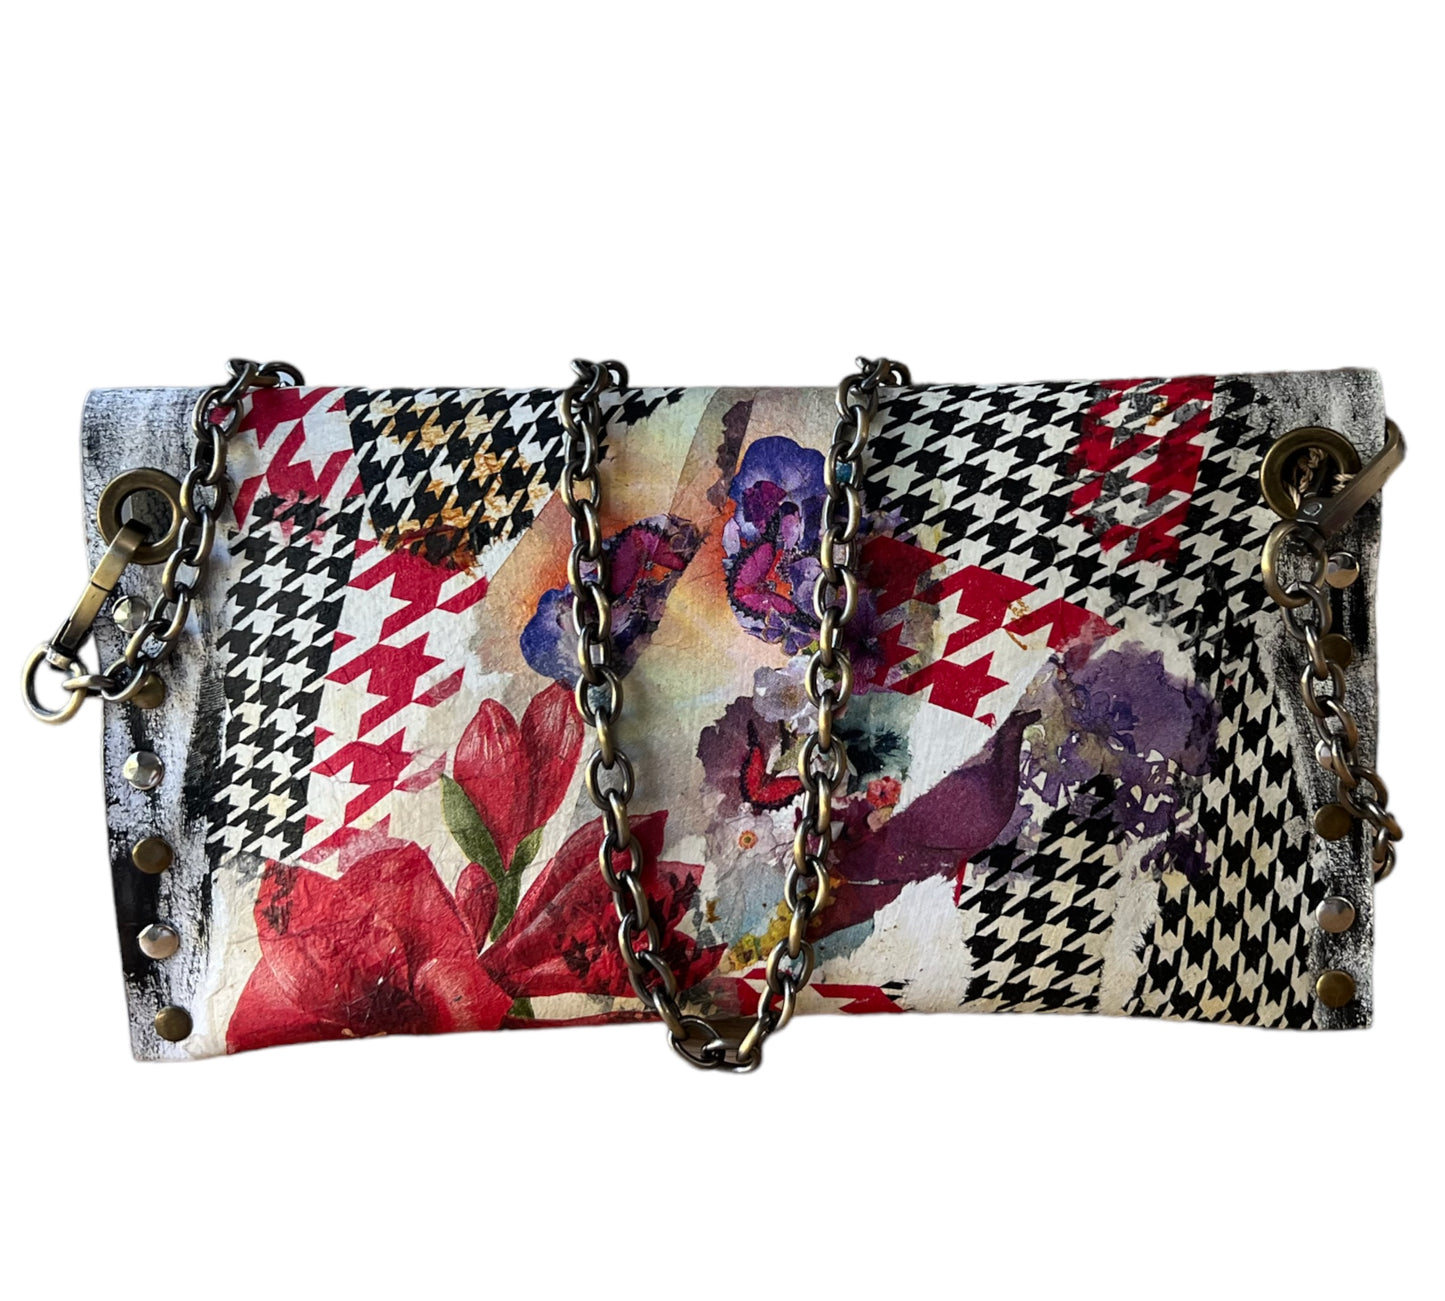 Checkered Pattern and Red Flowers Leather Handbag